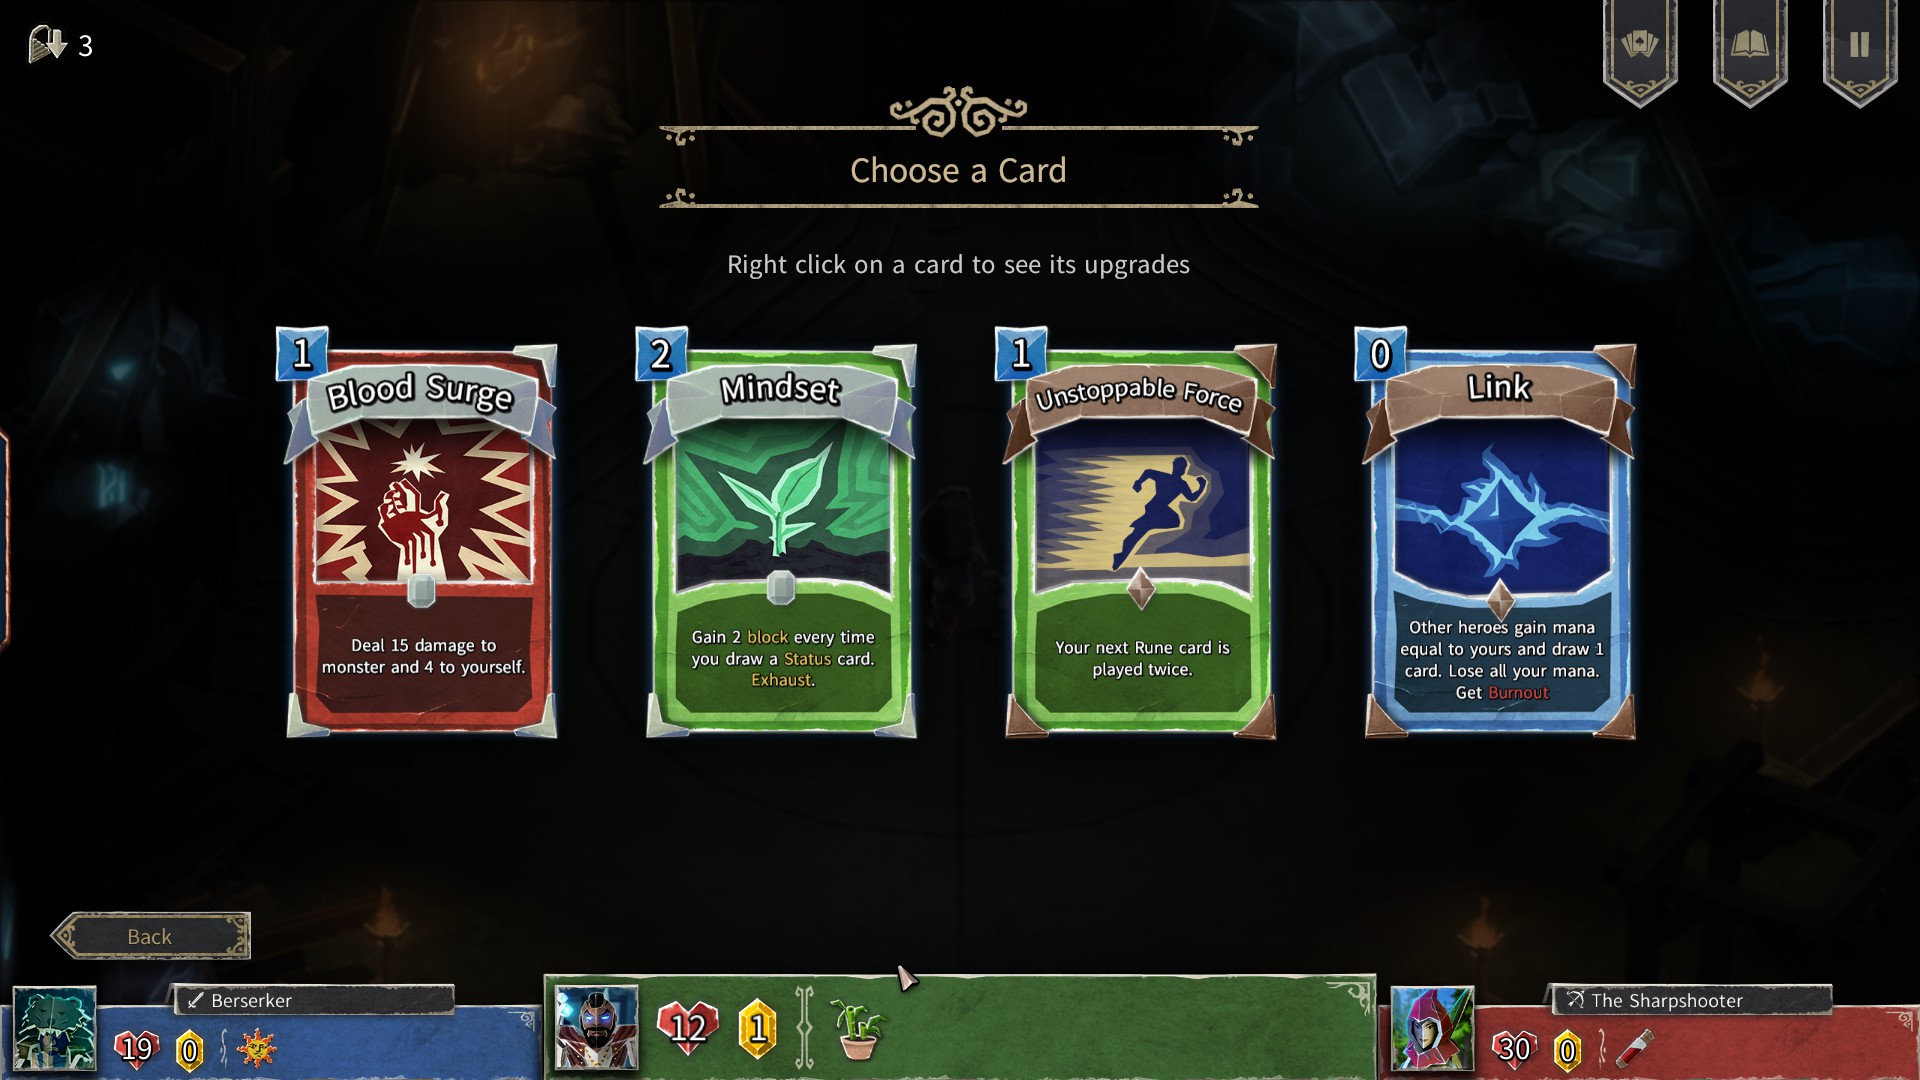 Four possible card selections are shown. Each card has it's own resource cost and skill type.